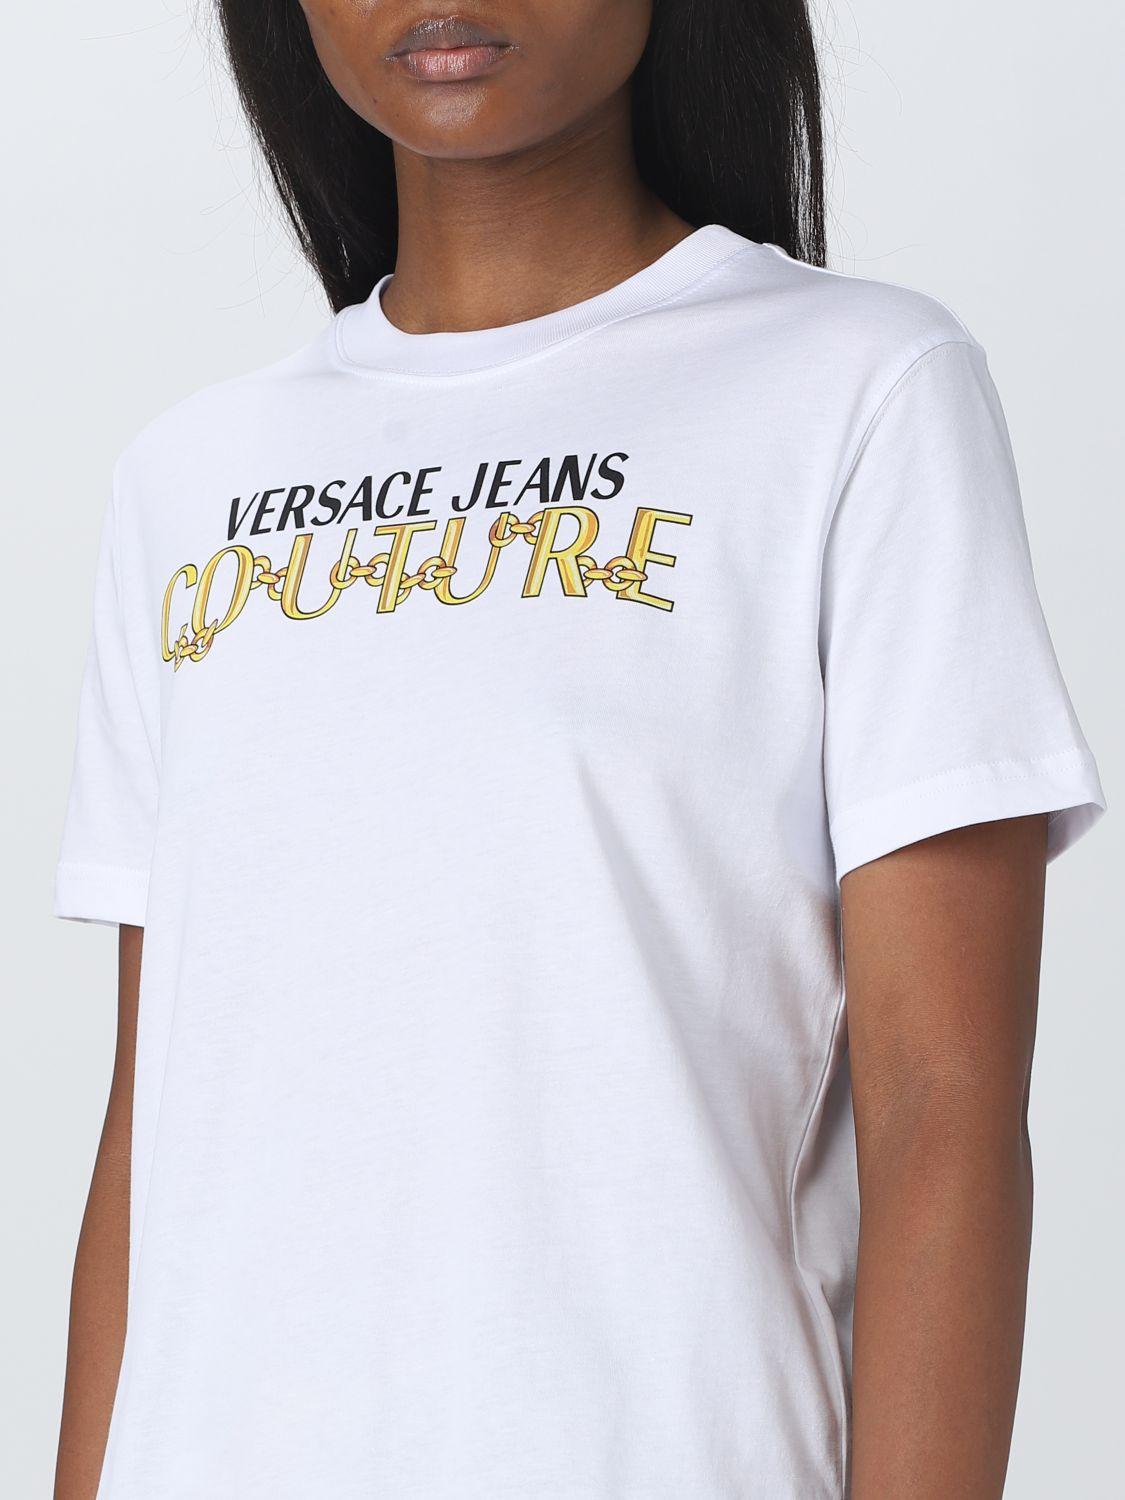 Versace Jeans Couture Cotton T-shirt in White | Lyst